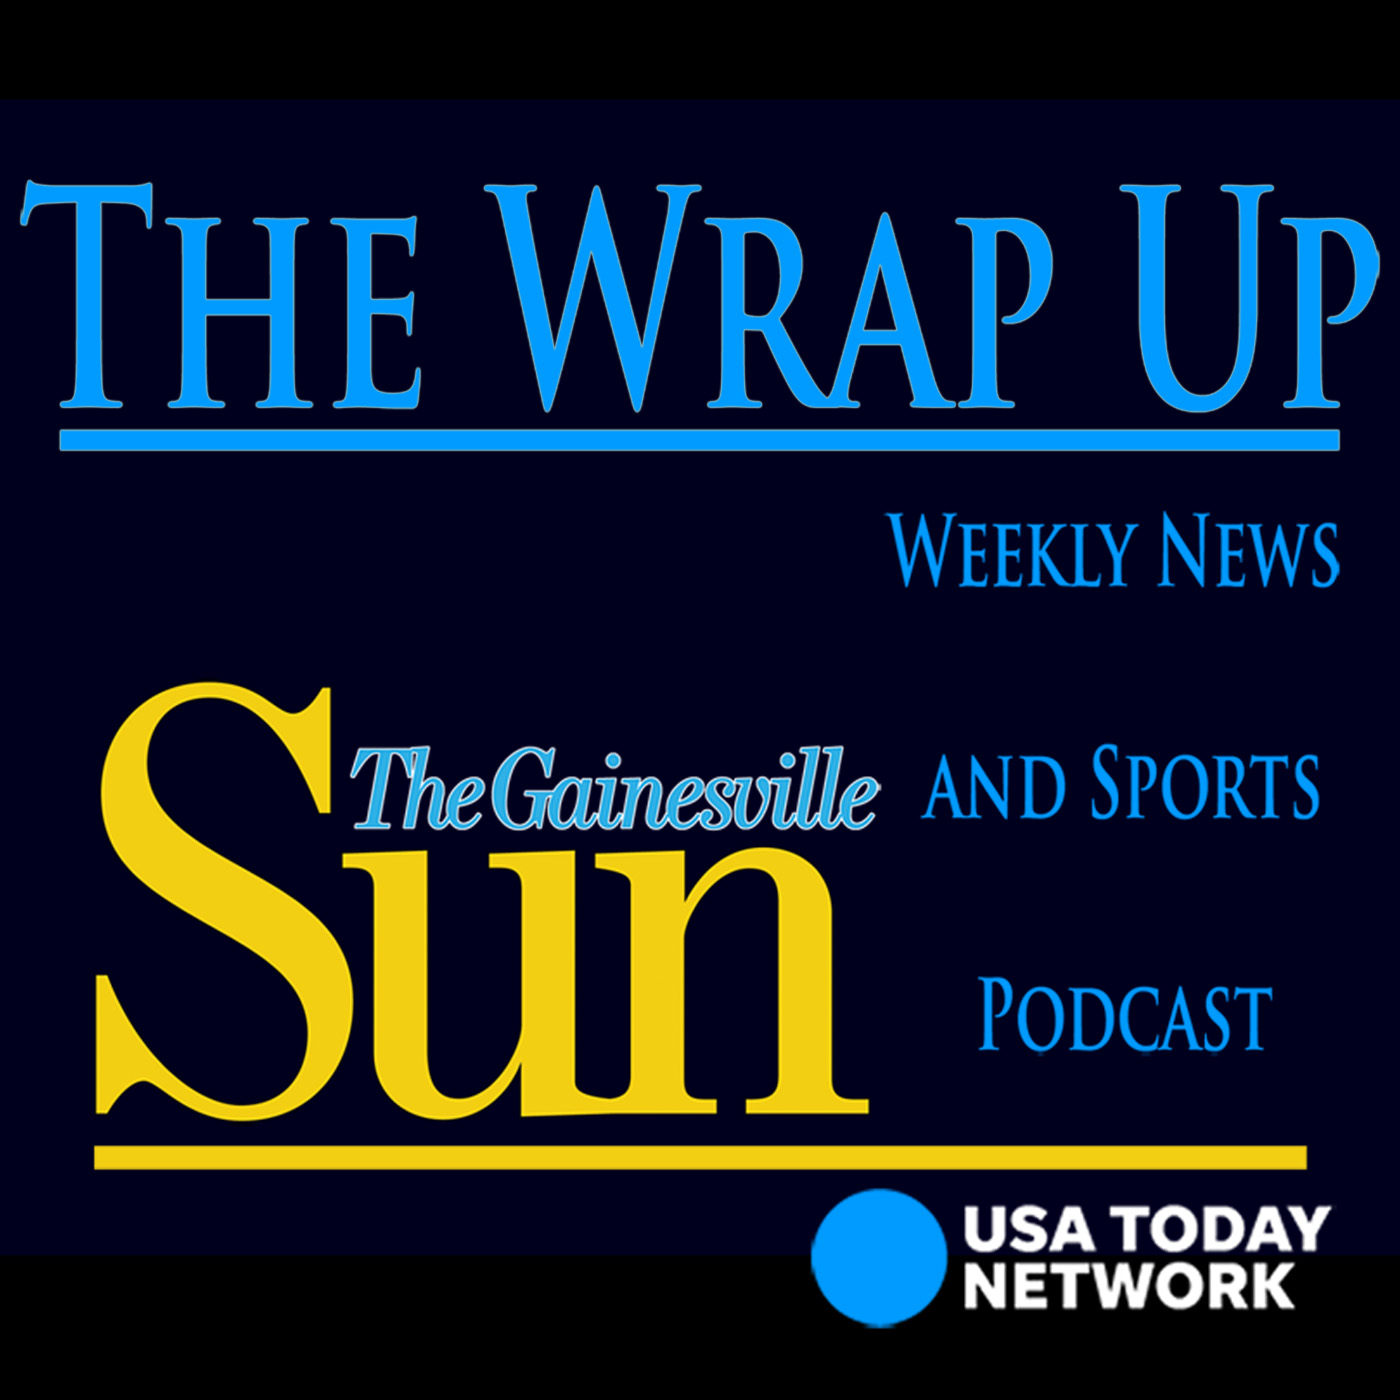 WrapUp: Listen to local news and sports from The Gainesville Sun